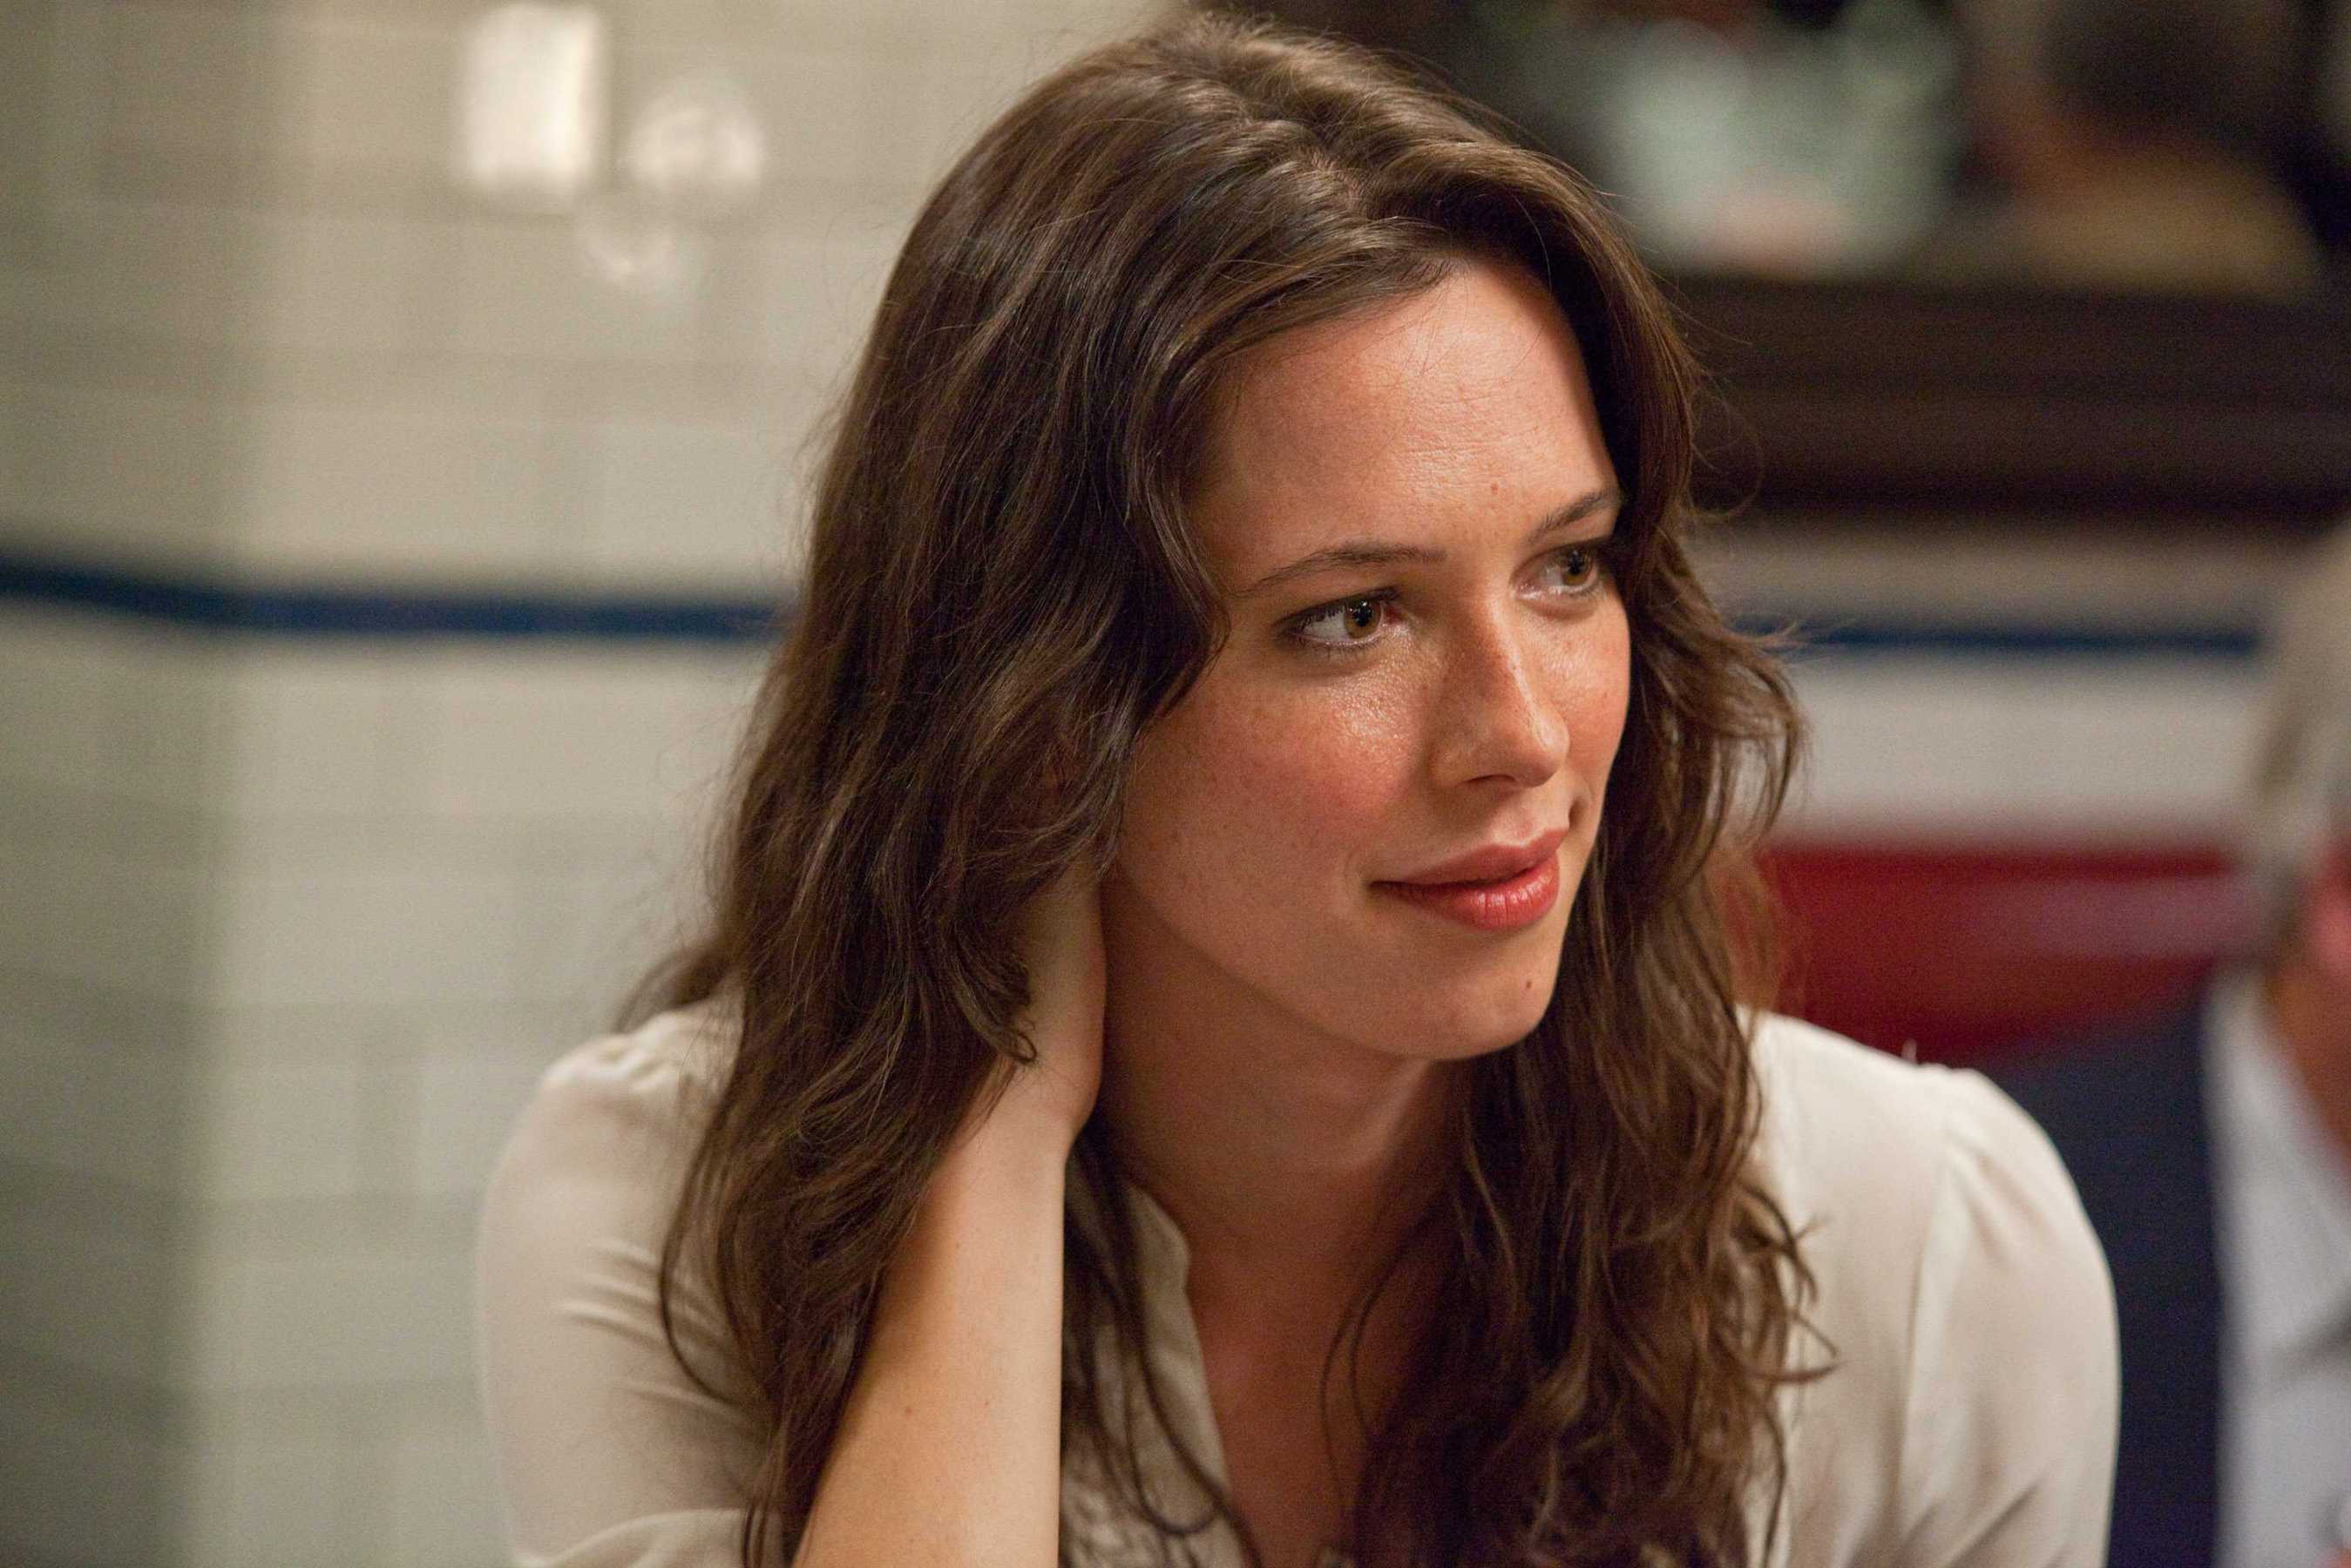 Rebecca Hall Wallpaper High Resolution and Quality Download